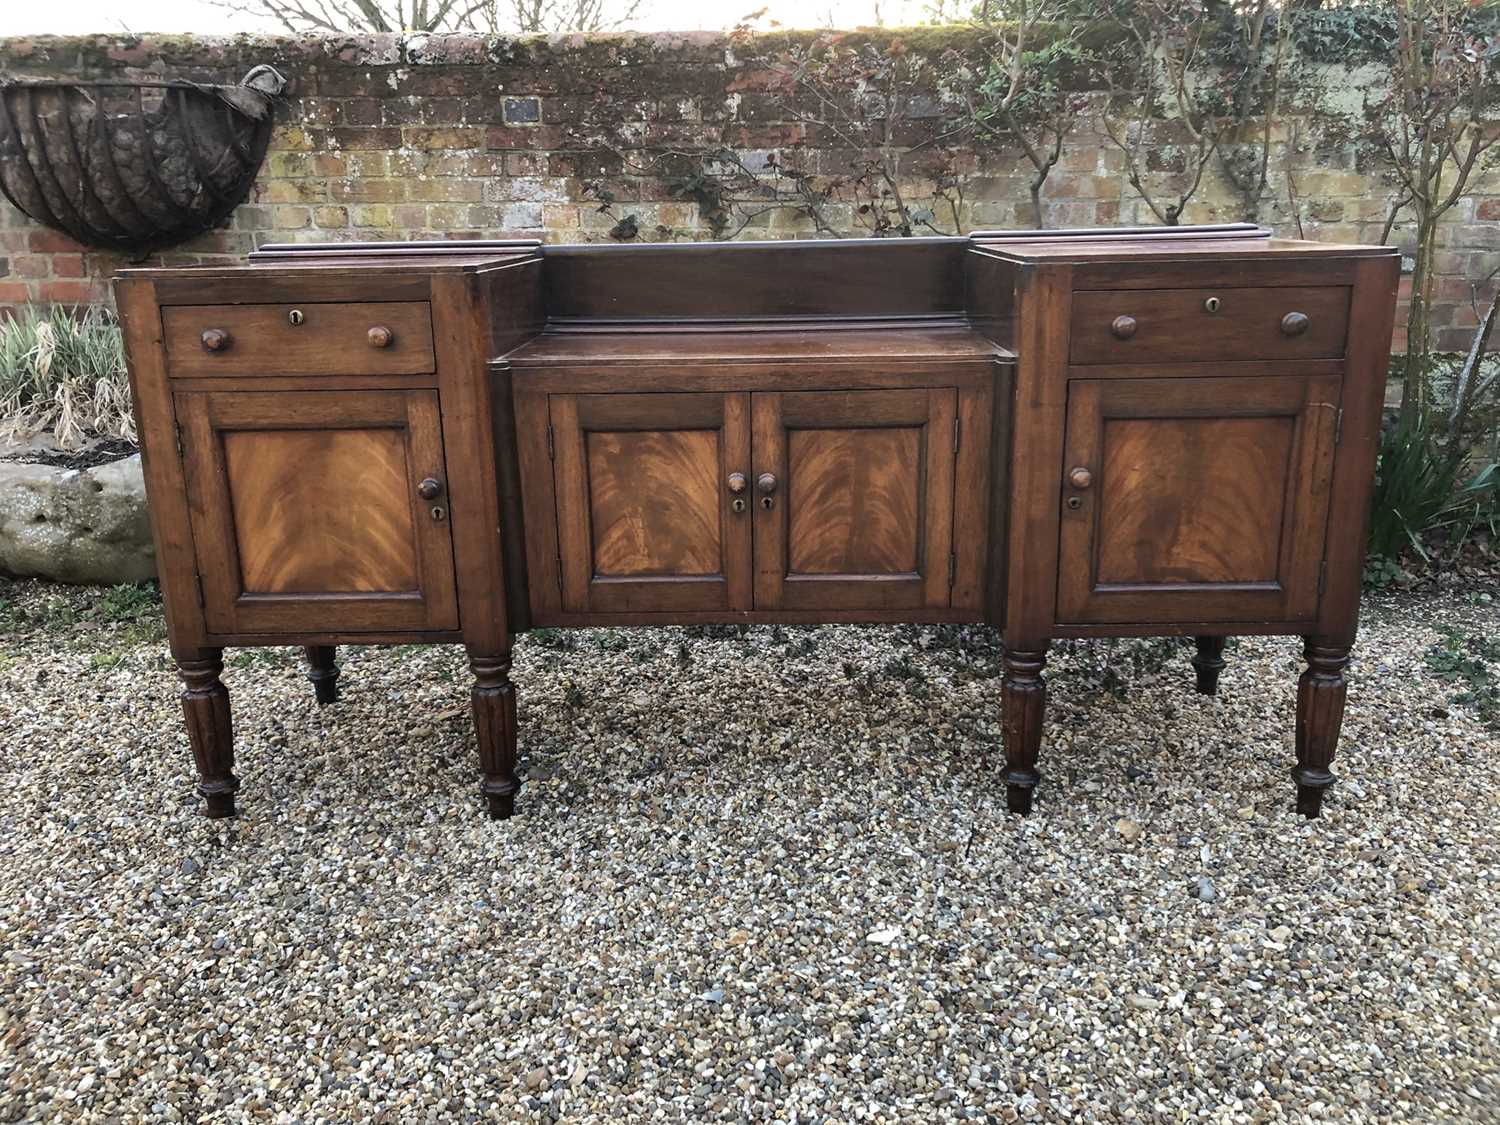 Lot 106 - William IV mahogany sideboard with sunk centre and an arrangement of two drawers and four cupboards, on turned and fluted tapered legs, 192cm wide x 60cm deep x 94cm high